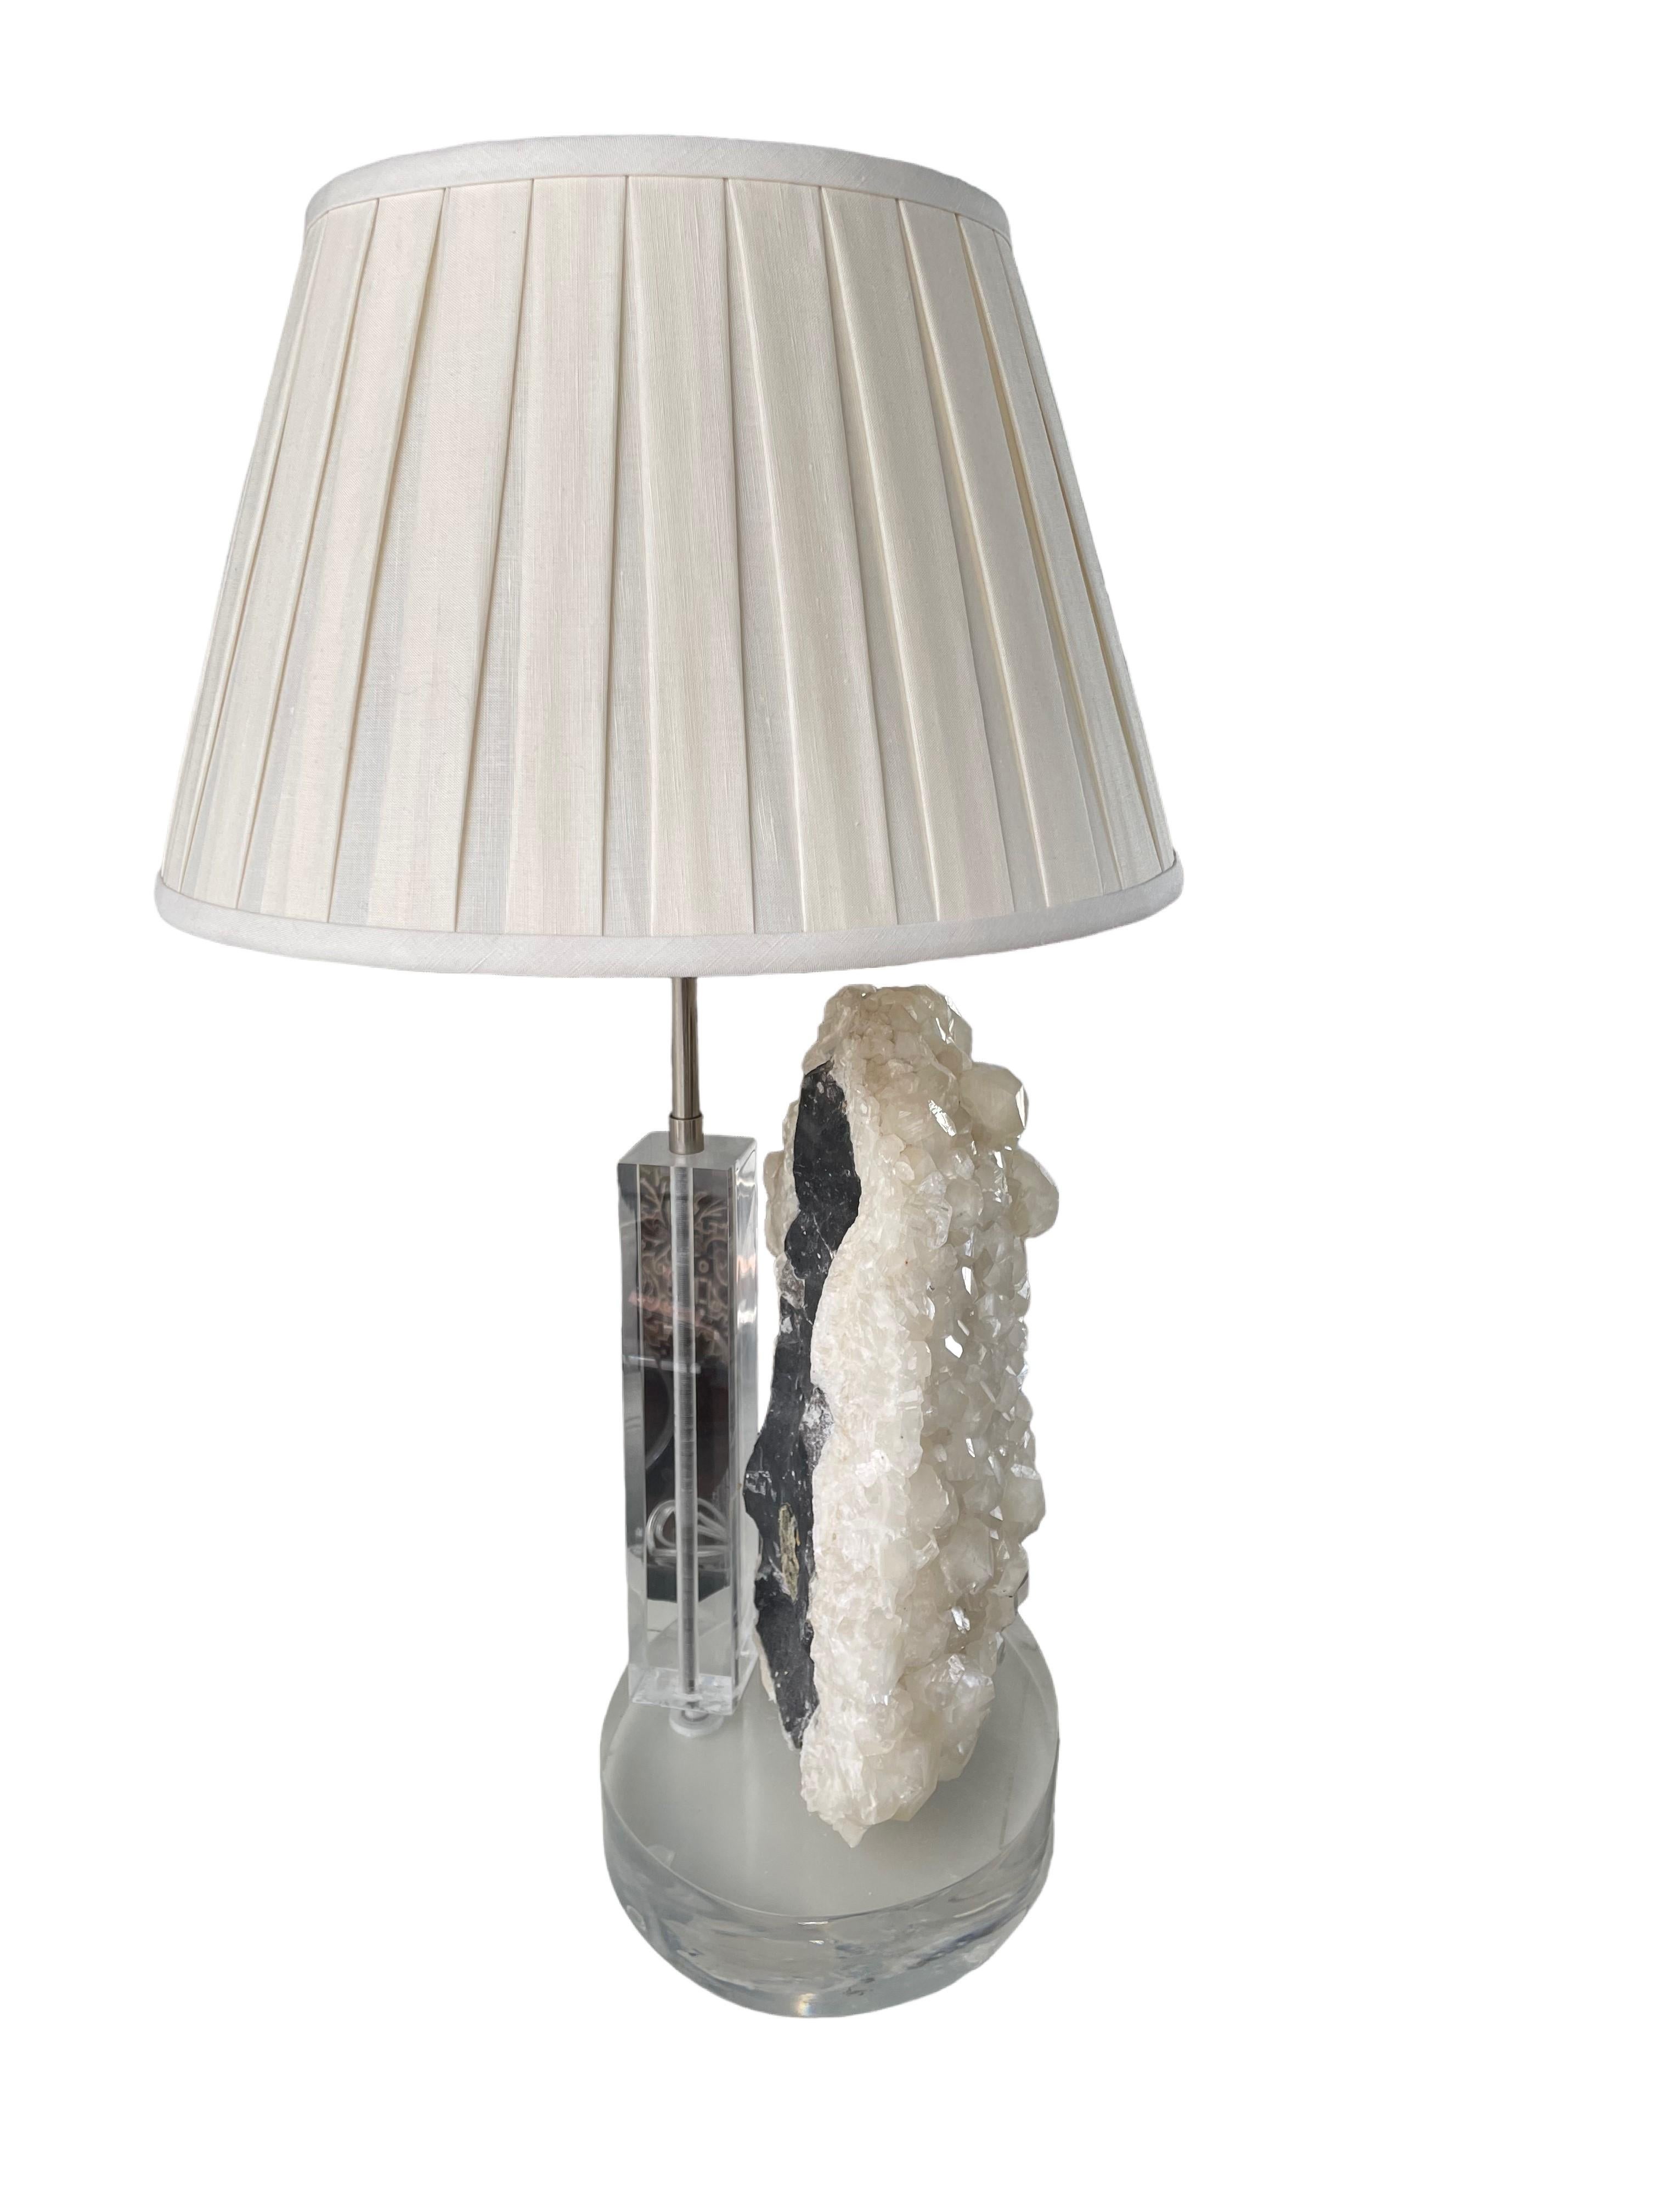 American Vintage Quartz Crystal and Lucite Lamp and Shade with Lucite Finial For Sale